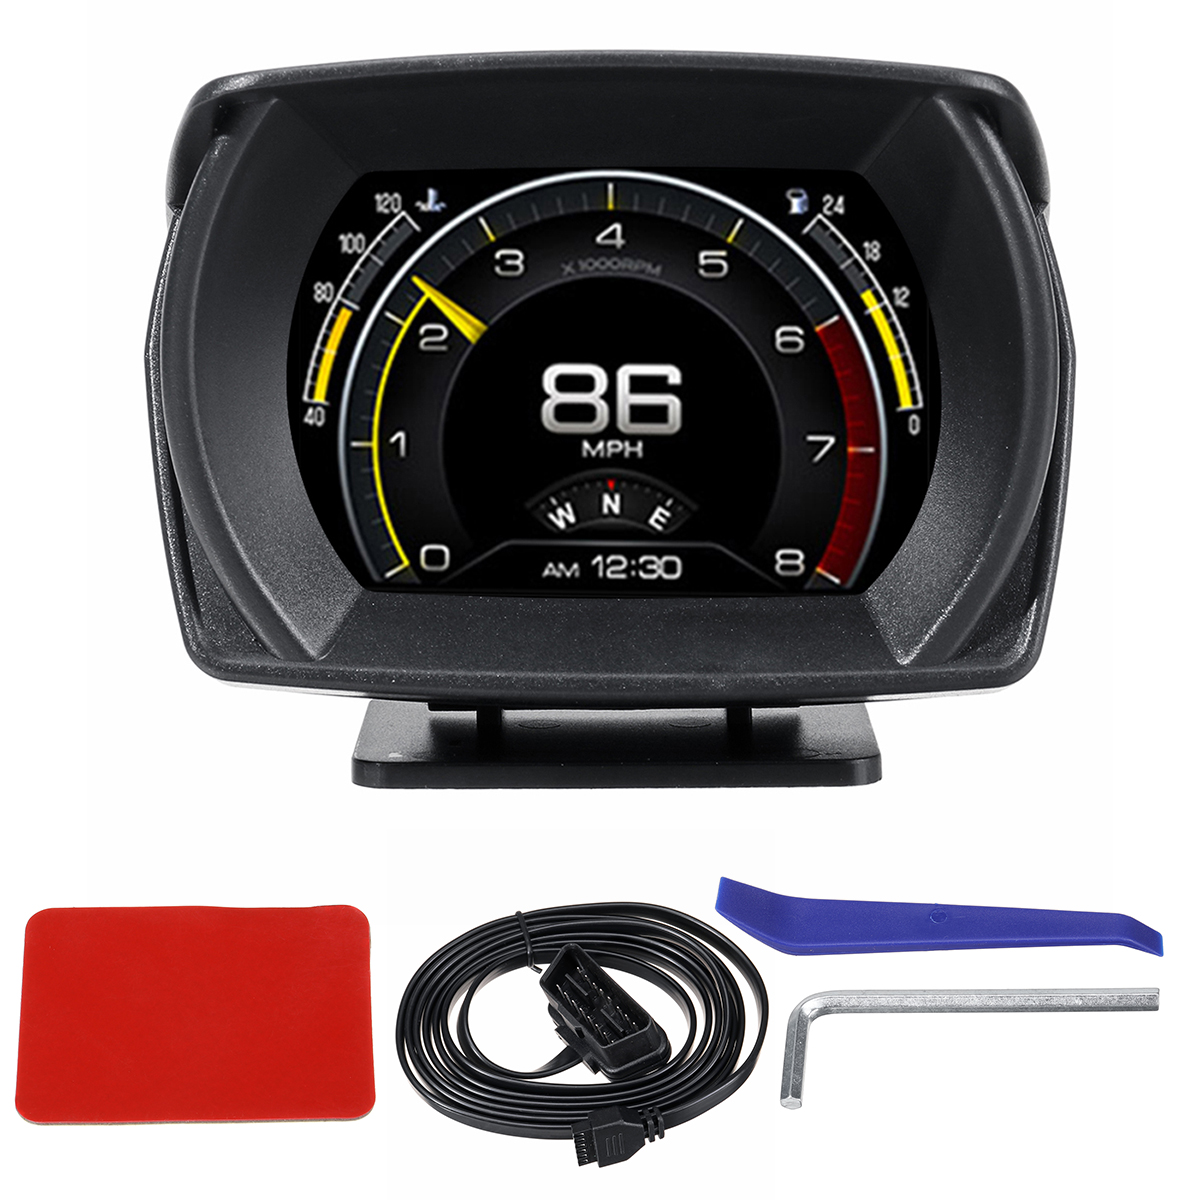 Newest HUD OBD GPS MEMS Head up Digital LCD Display Scanner Trip Computer Driving Speedometer Auto Electronics Accessories